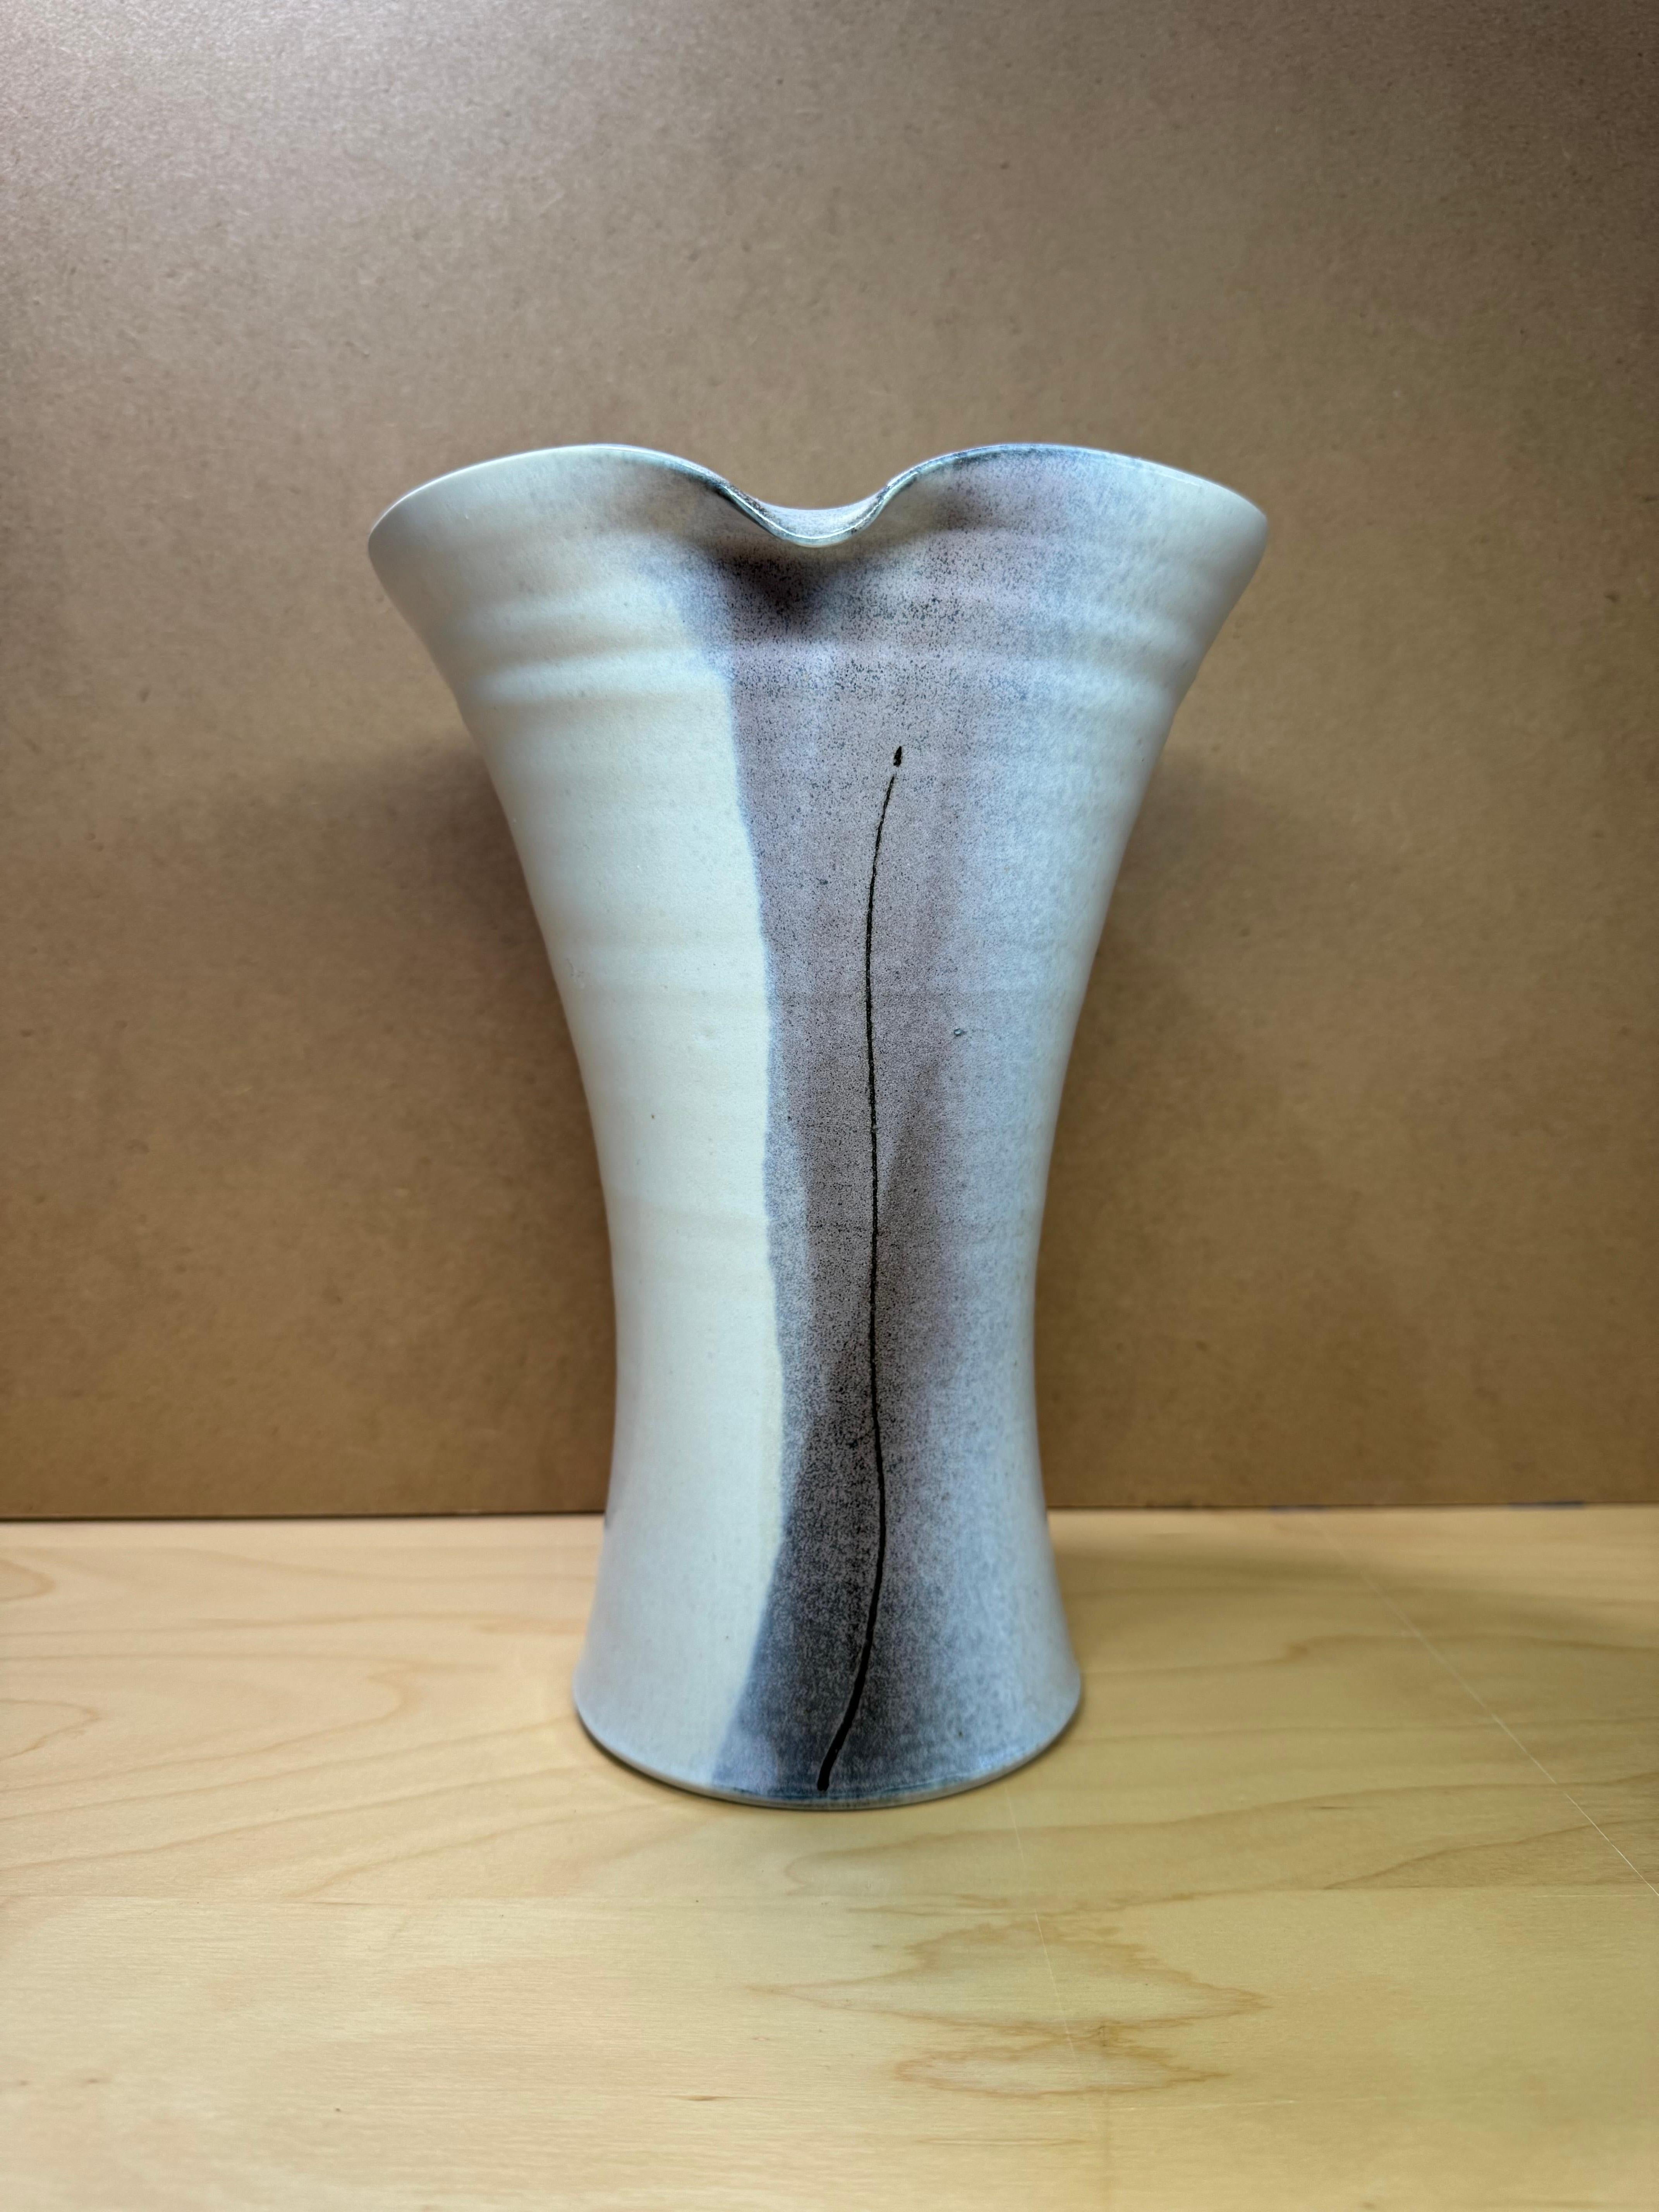 Gorgeous hand thrown studio pottery vase in an off white color with accents of different shades of brown and finished off with a subtle black line. 

This vase is signed on the bottom by the artist; Dan Flat.

The vase is in excellent condition. It